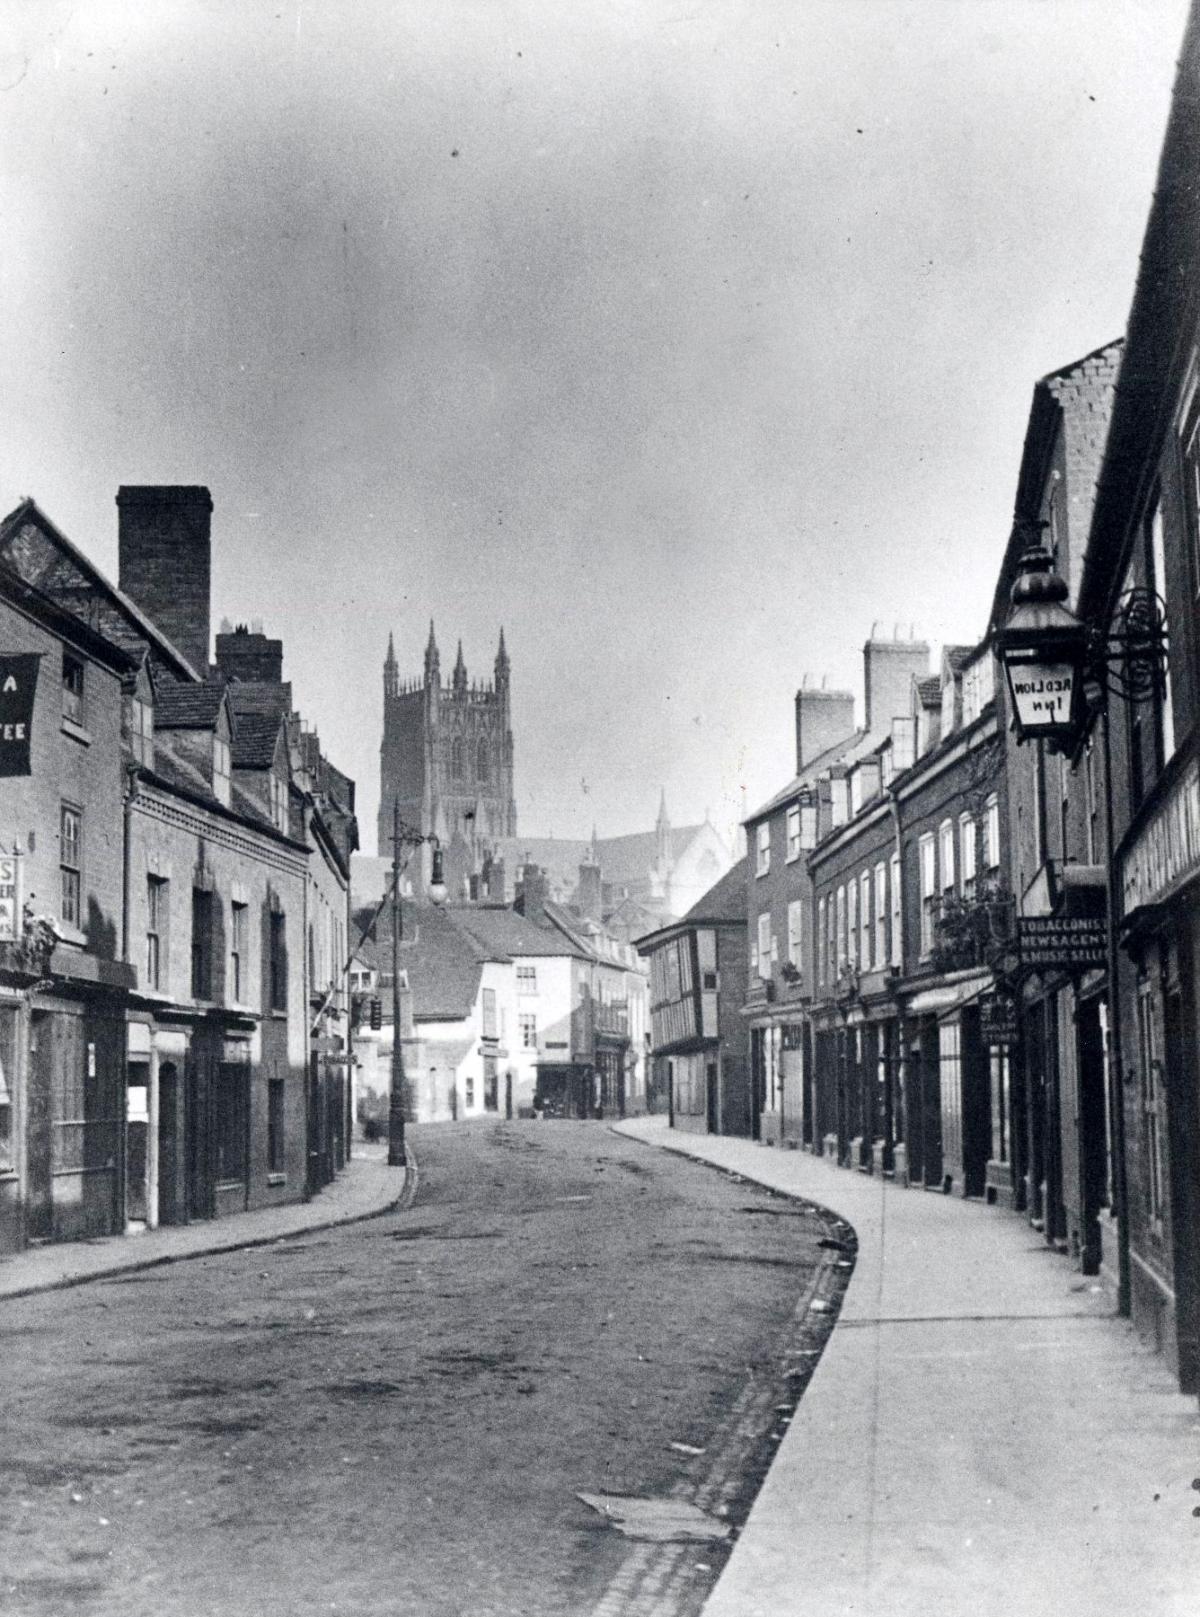 The familiar curve of Sidbury, about 100 years ago, with the cathedral tower in the background and shops lining its south side. The row on the right, including the entrance to the Commandery, survive today.